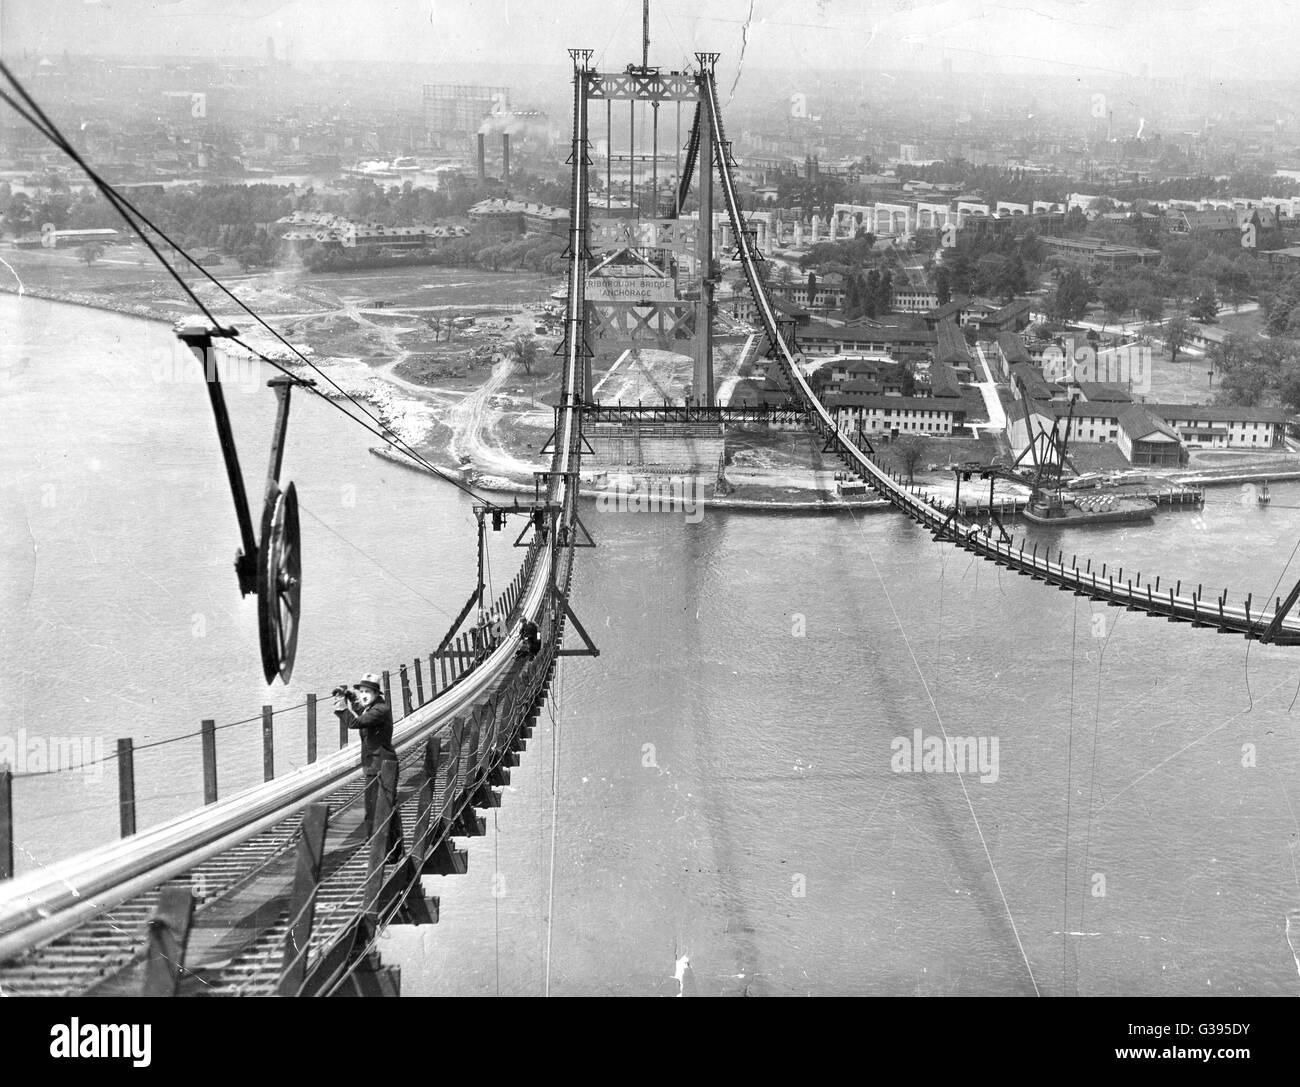 Construction of the Triborough Suspension Bridge between Manhattan, the Bronx and Queens. Stock Photo